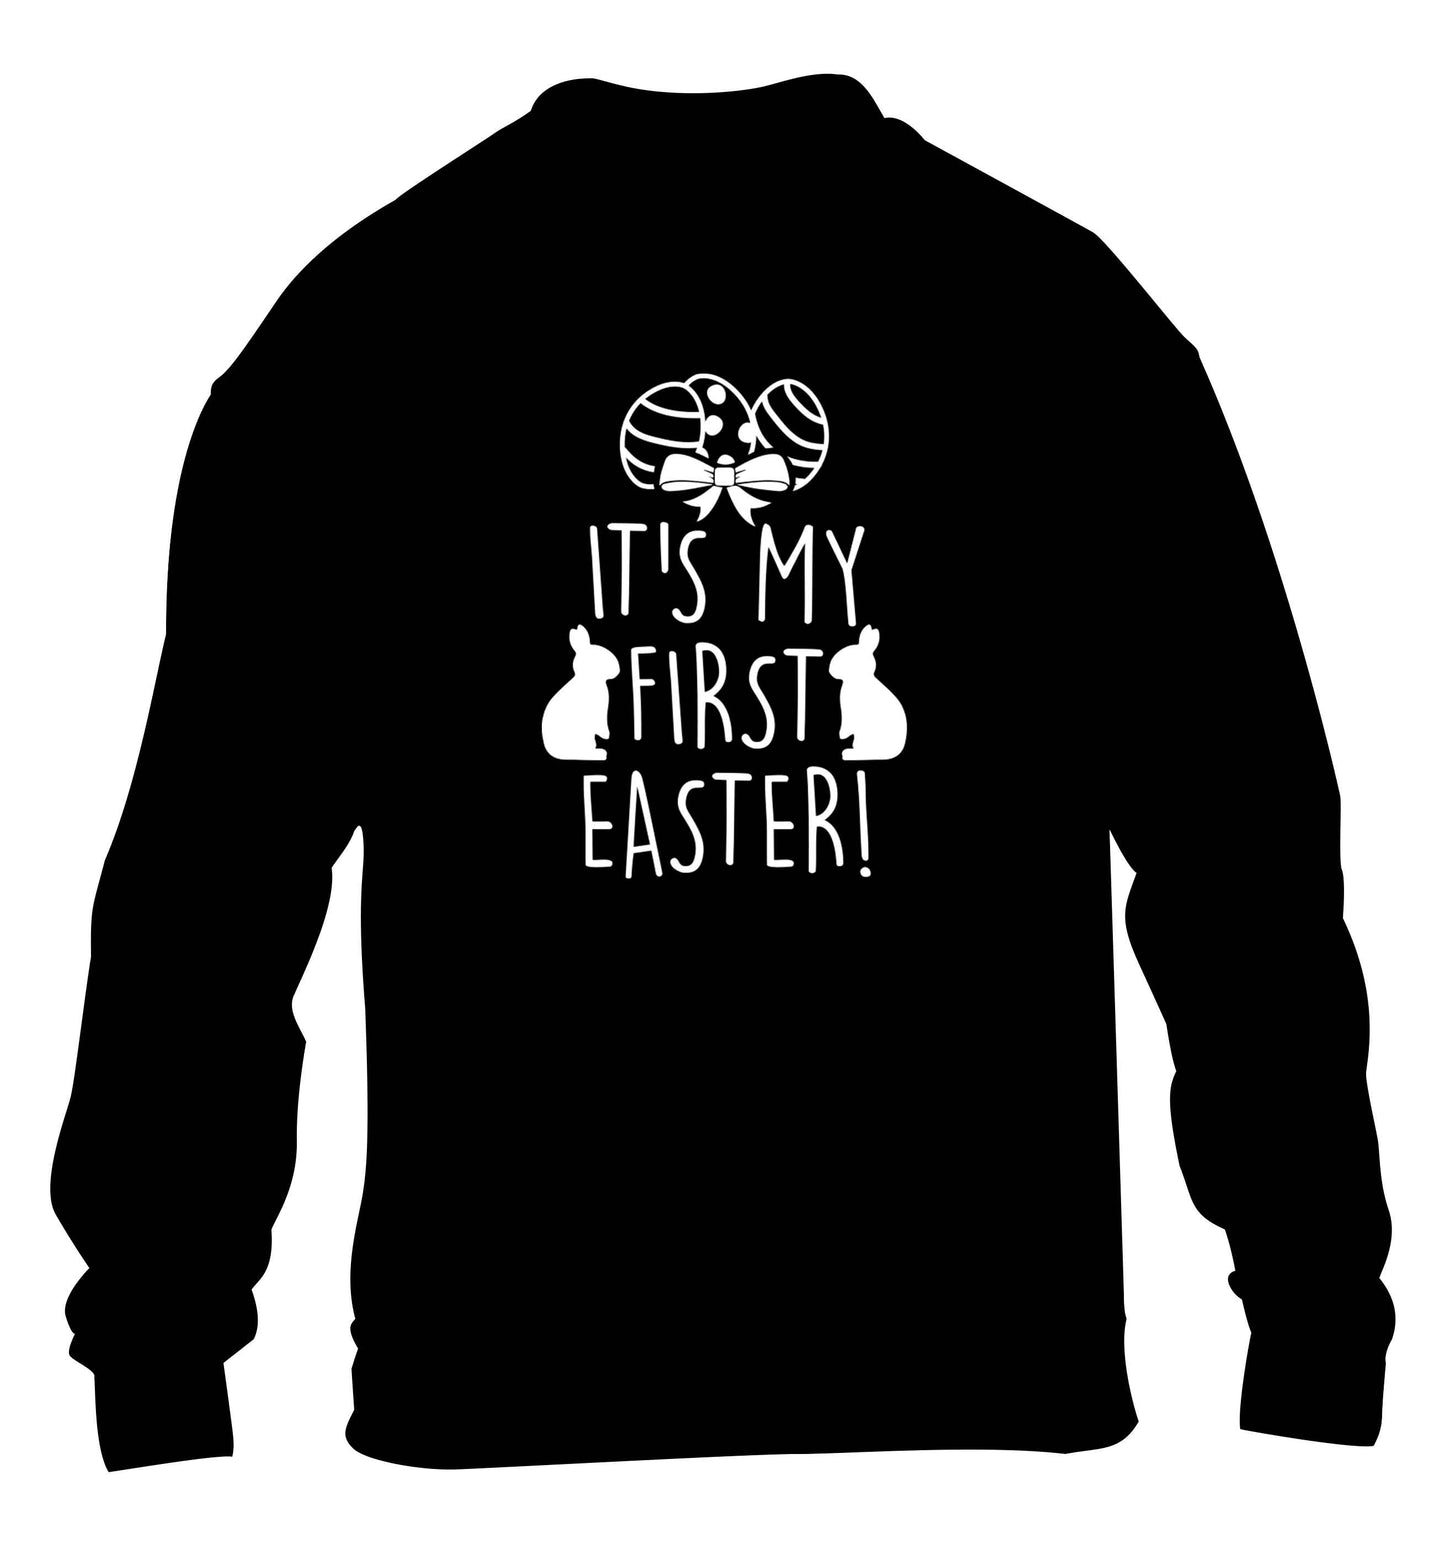 It's my first Easter children's black sweater 12-13 Years